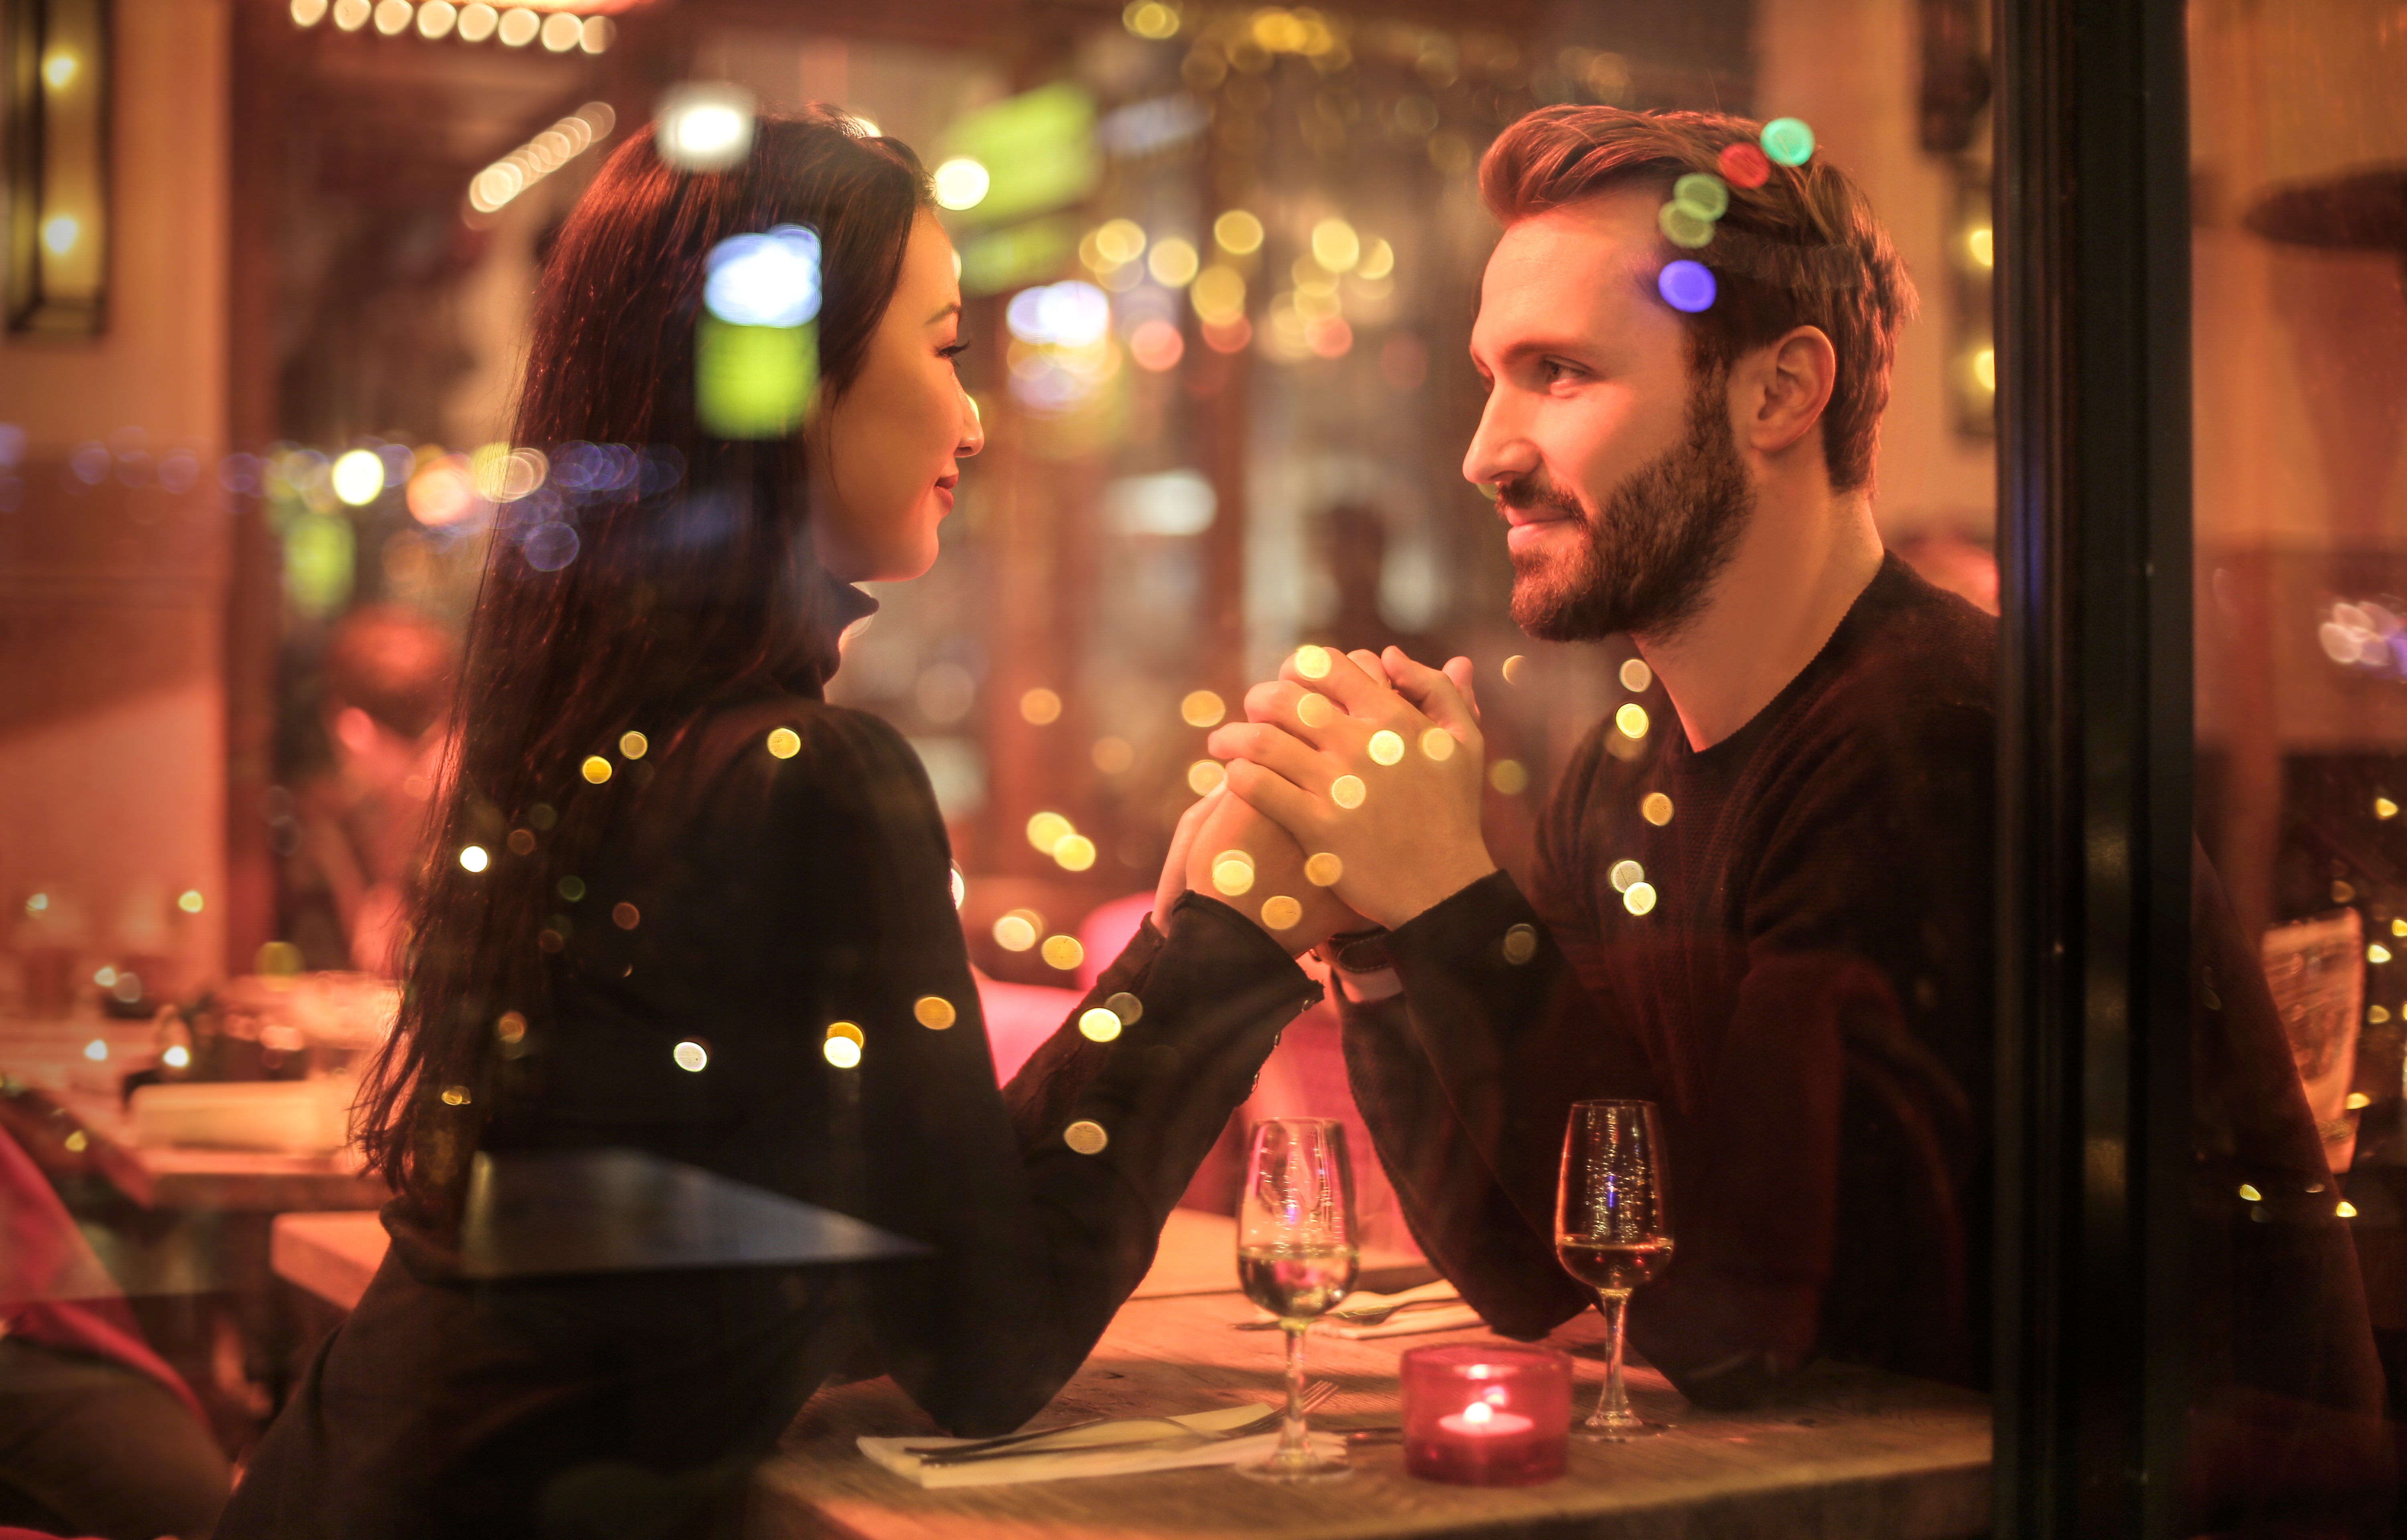 Man and woman holding hands in a restaurant